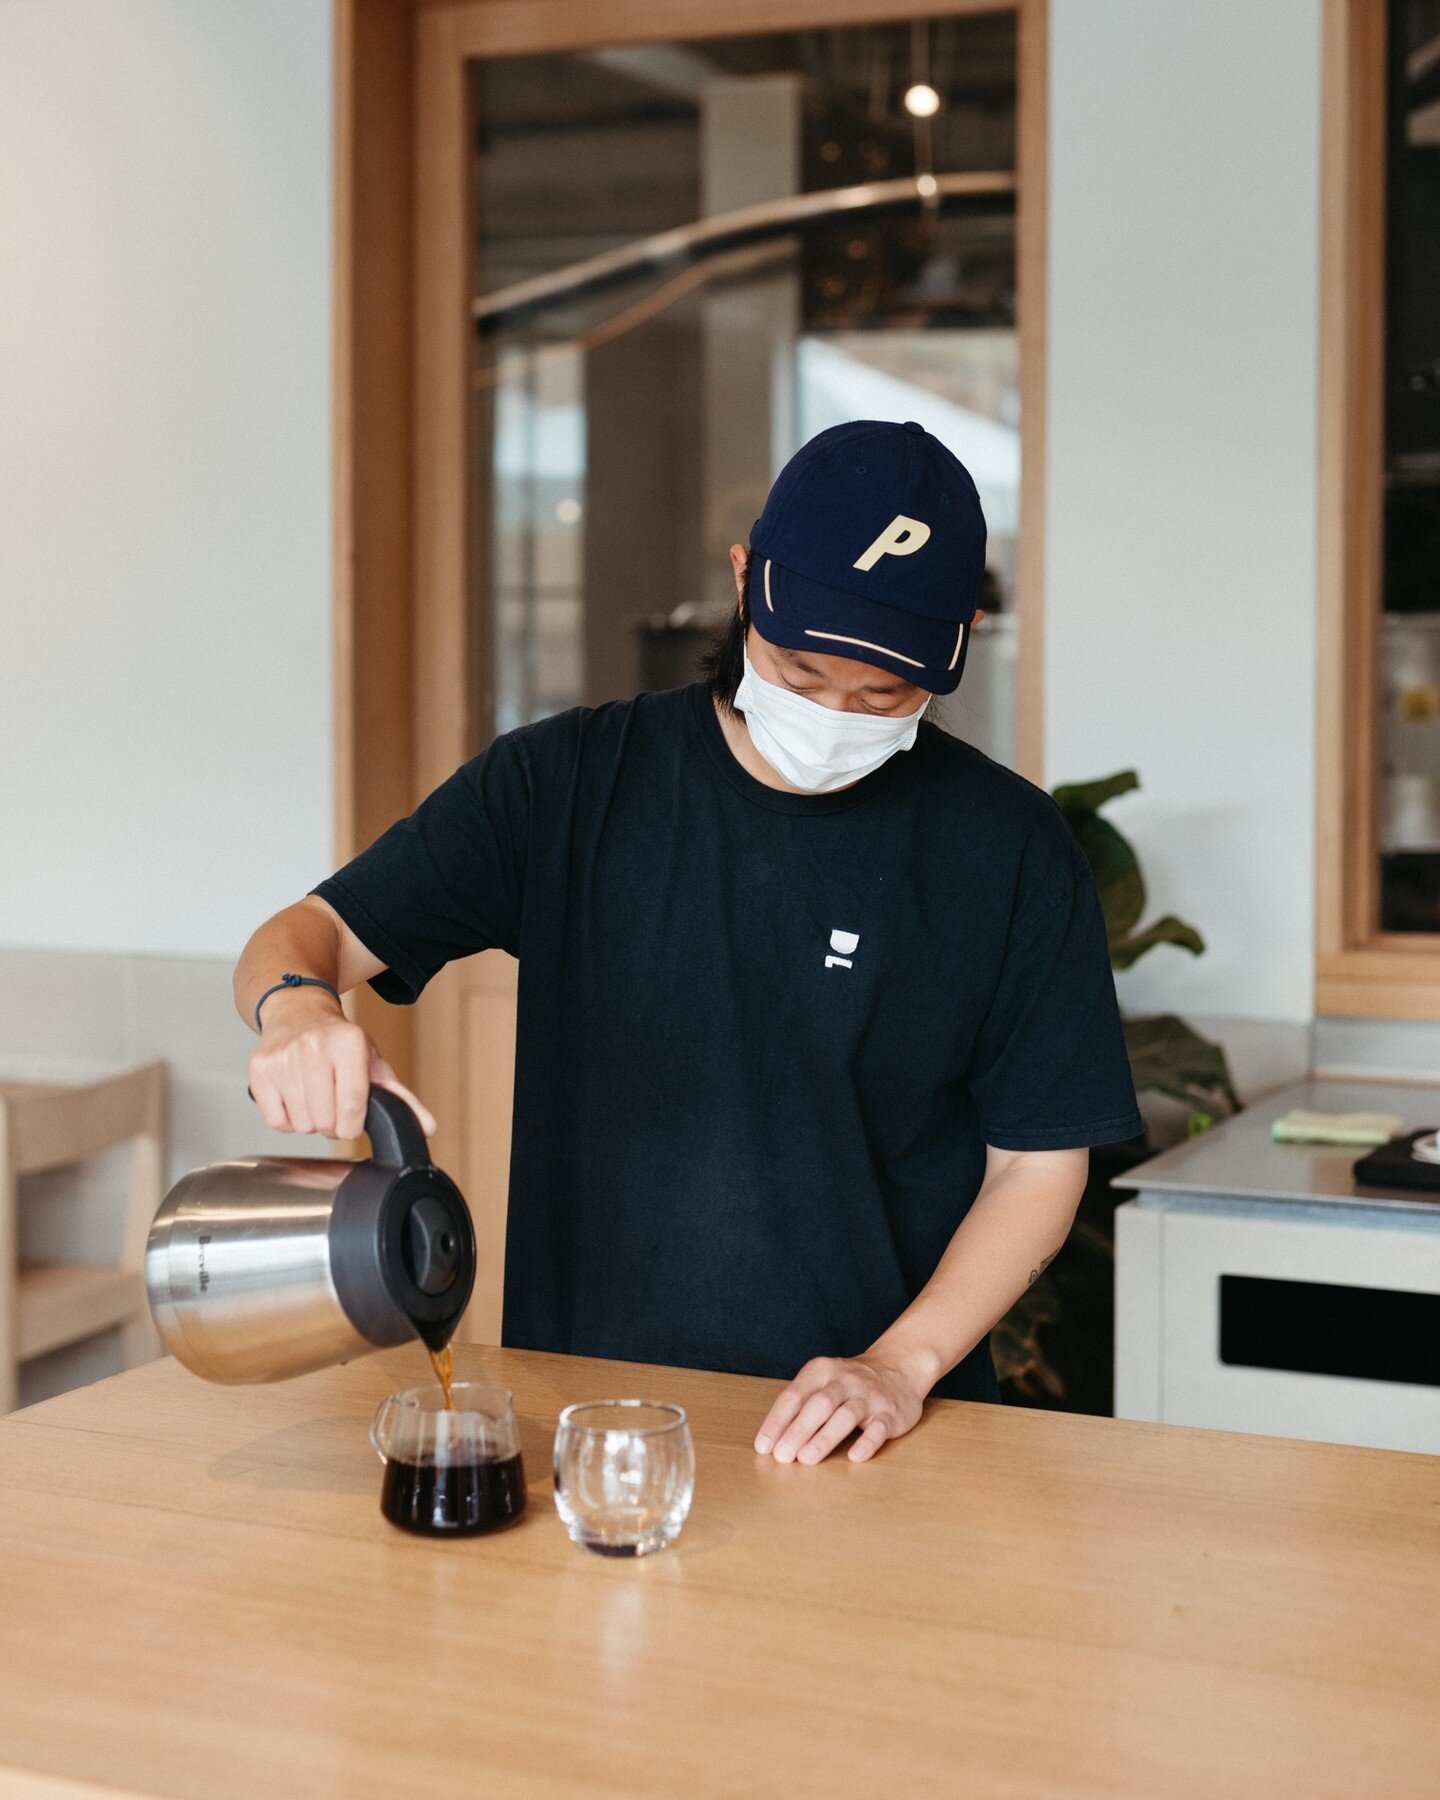 Starting our Friday with a fresh cup of batch brew. We've got some exciting single origins in the lineup this year and we can't wait to share them with you!⁠
⁠
Click the link in our bio to see what we've been roasting this week and pick up a bag for 